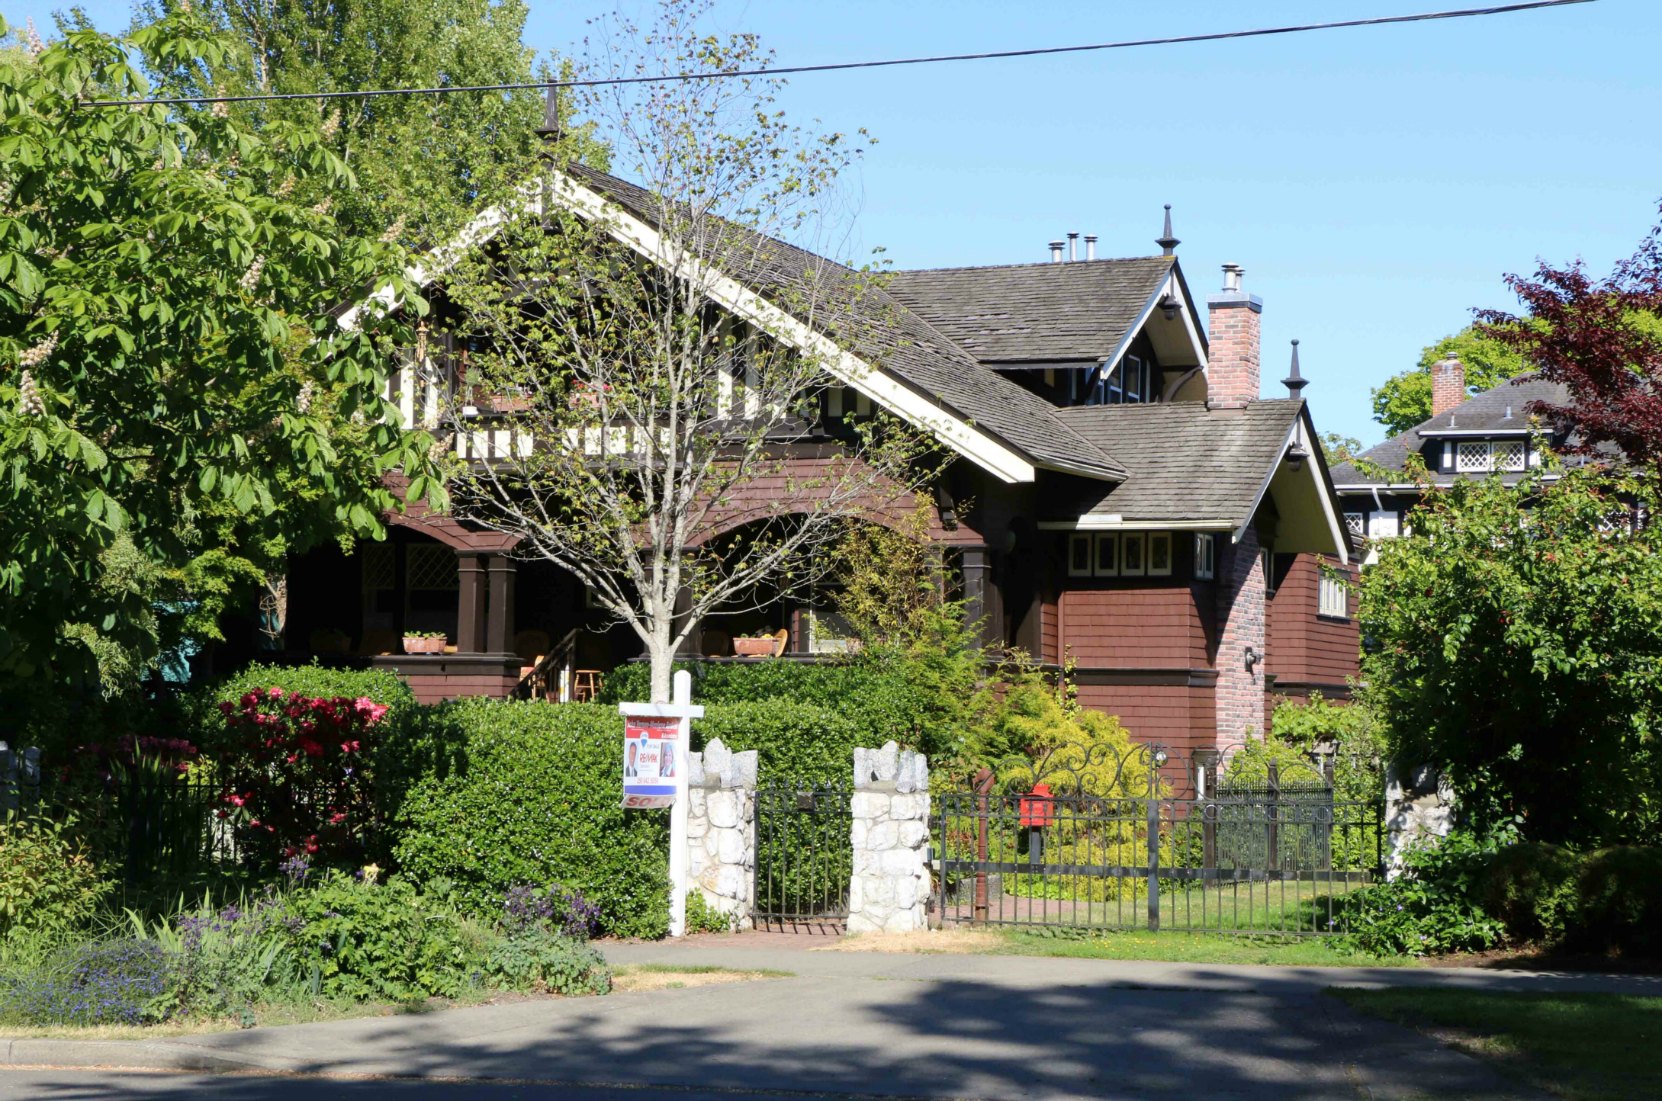 25 Cook Street, built in 1911 by architect H.J Rous Cullen, for realtor Louis York